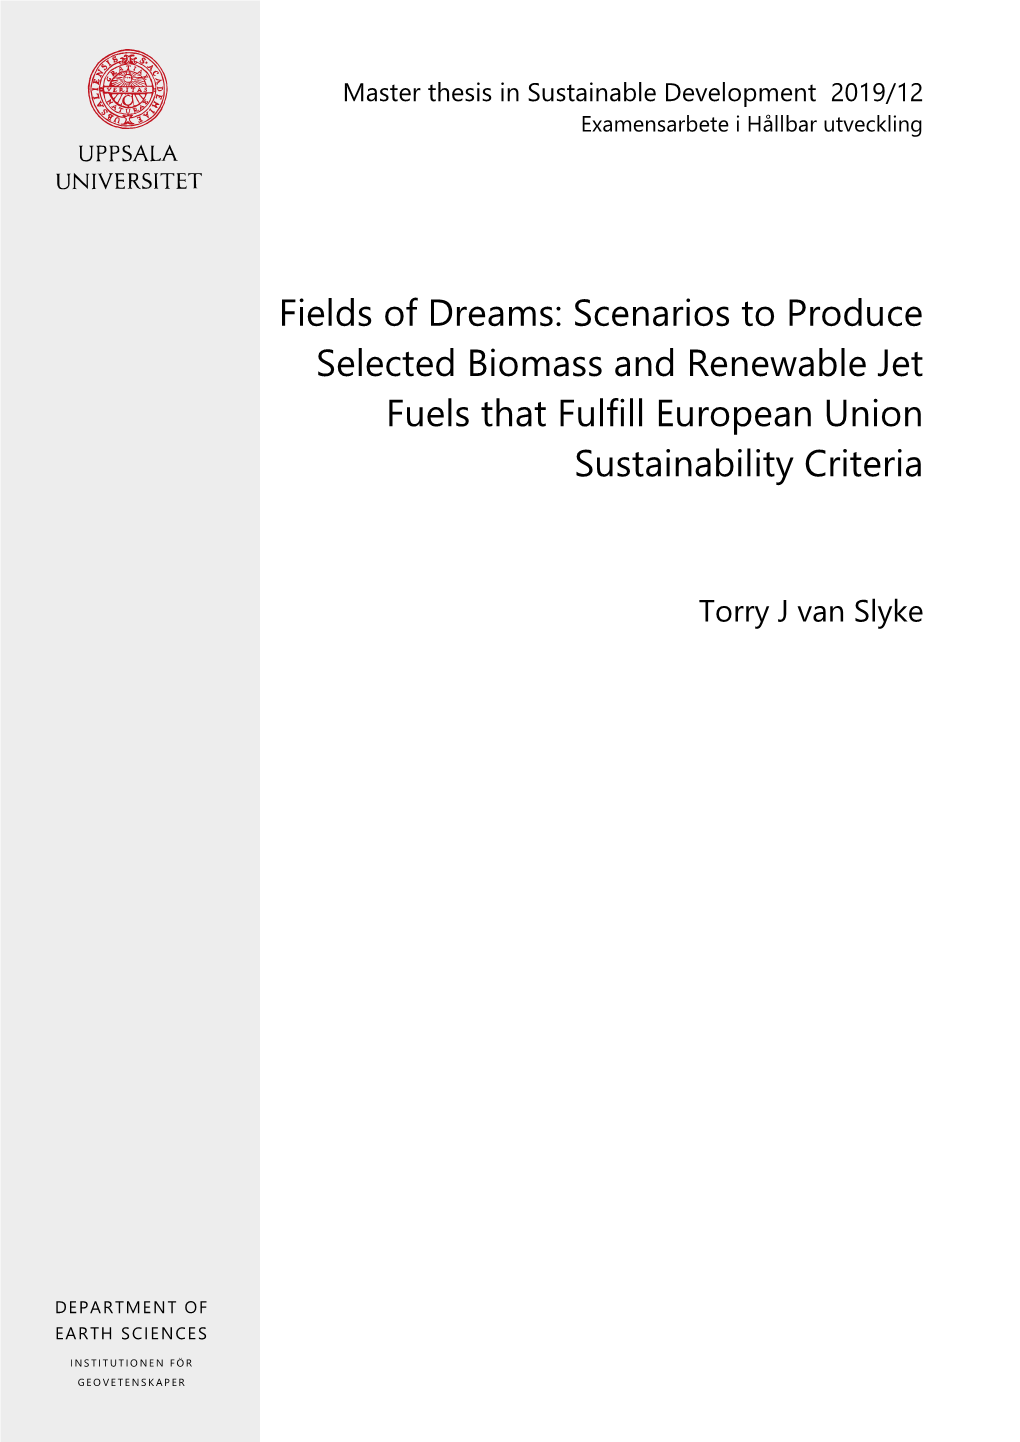 Scenarios to Produce Selected Biomass and Renewable Jet Fuels That Fulfill European Union